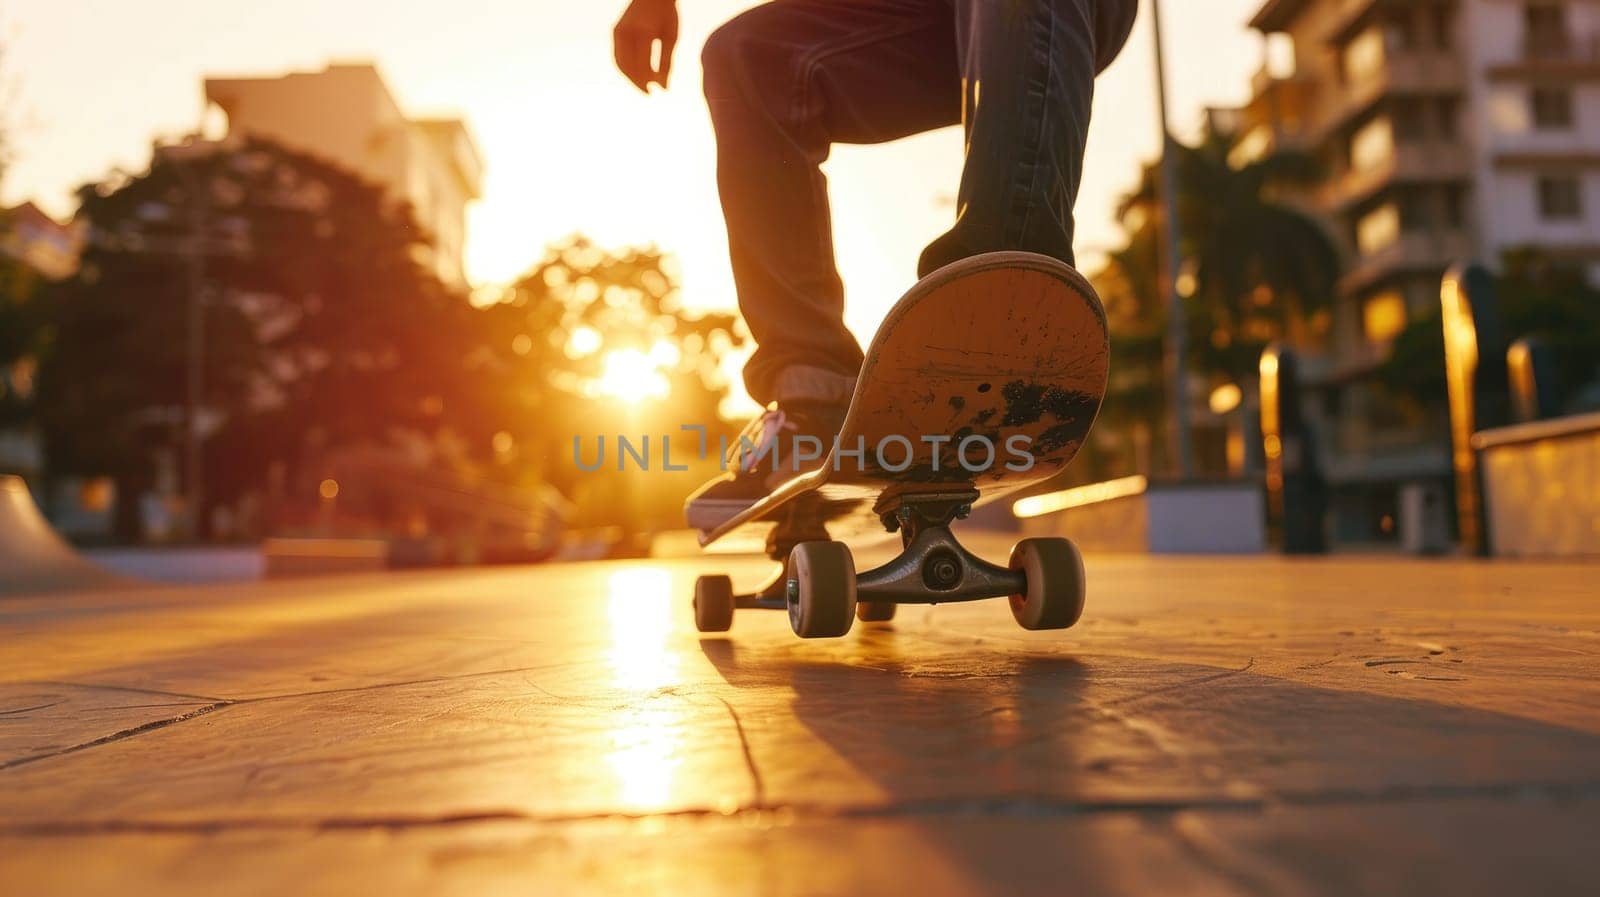 Urban Skateboarding Adventure at Golden Hour with Teenager Enjoying the Ride..